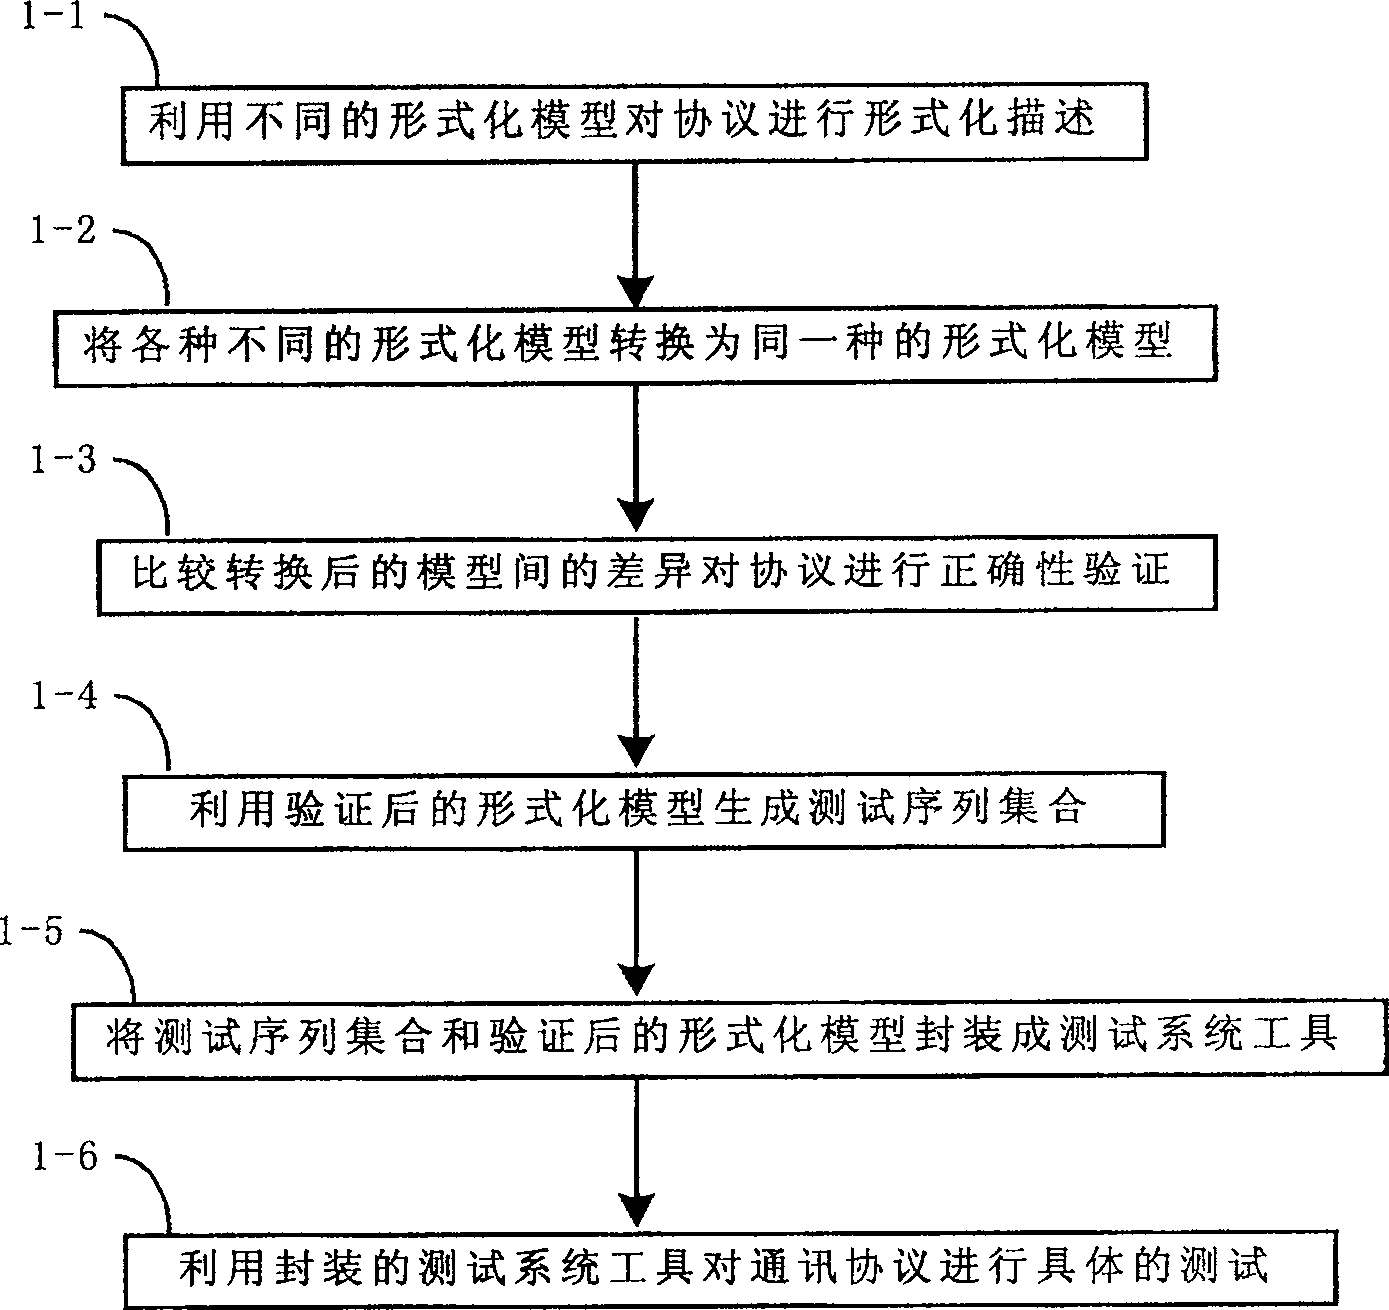 Protocol validity verifying and testing method based on mode conversion